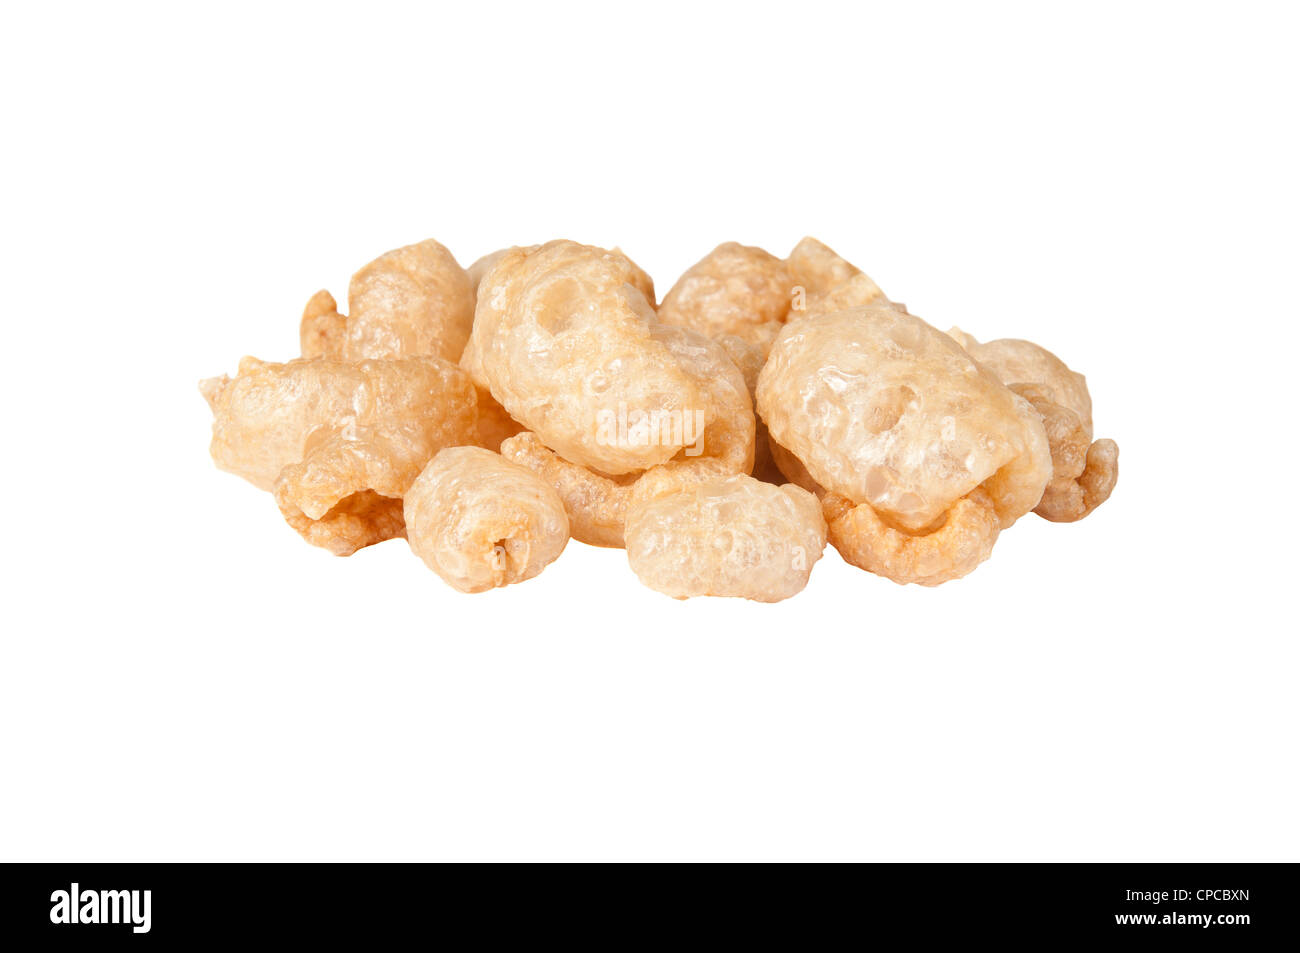 Fried pork rinds over a white background Stock Photo